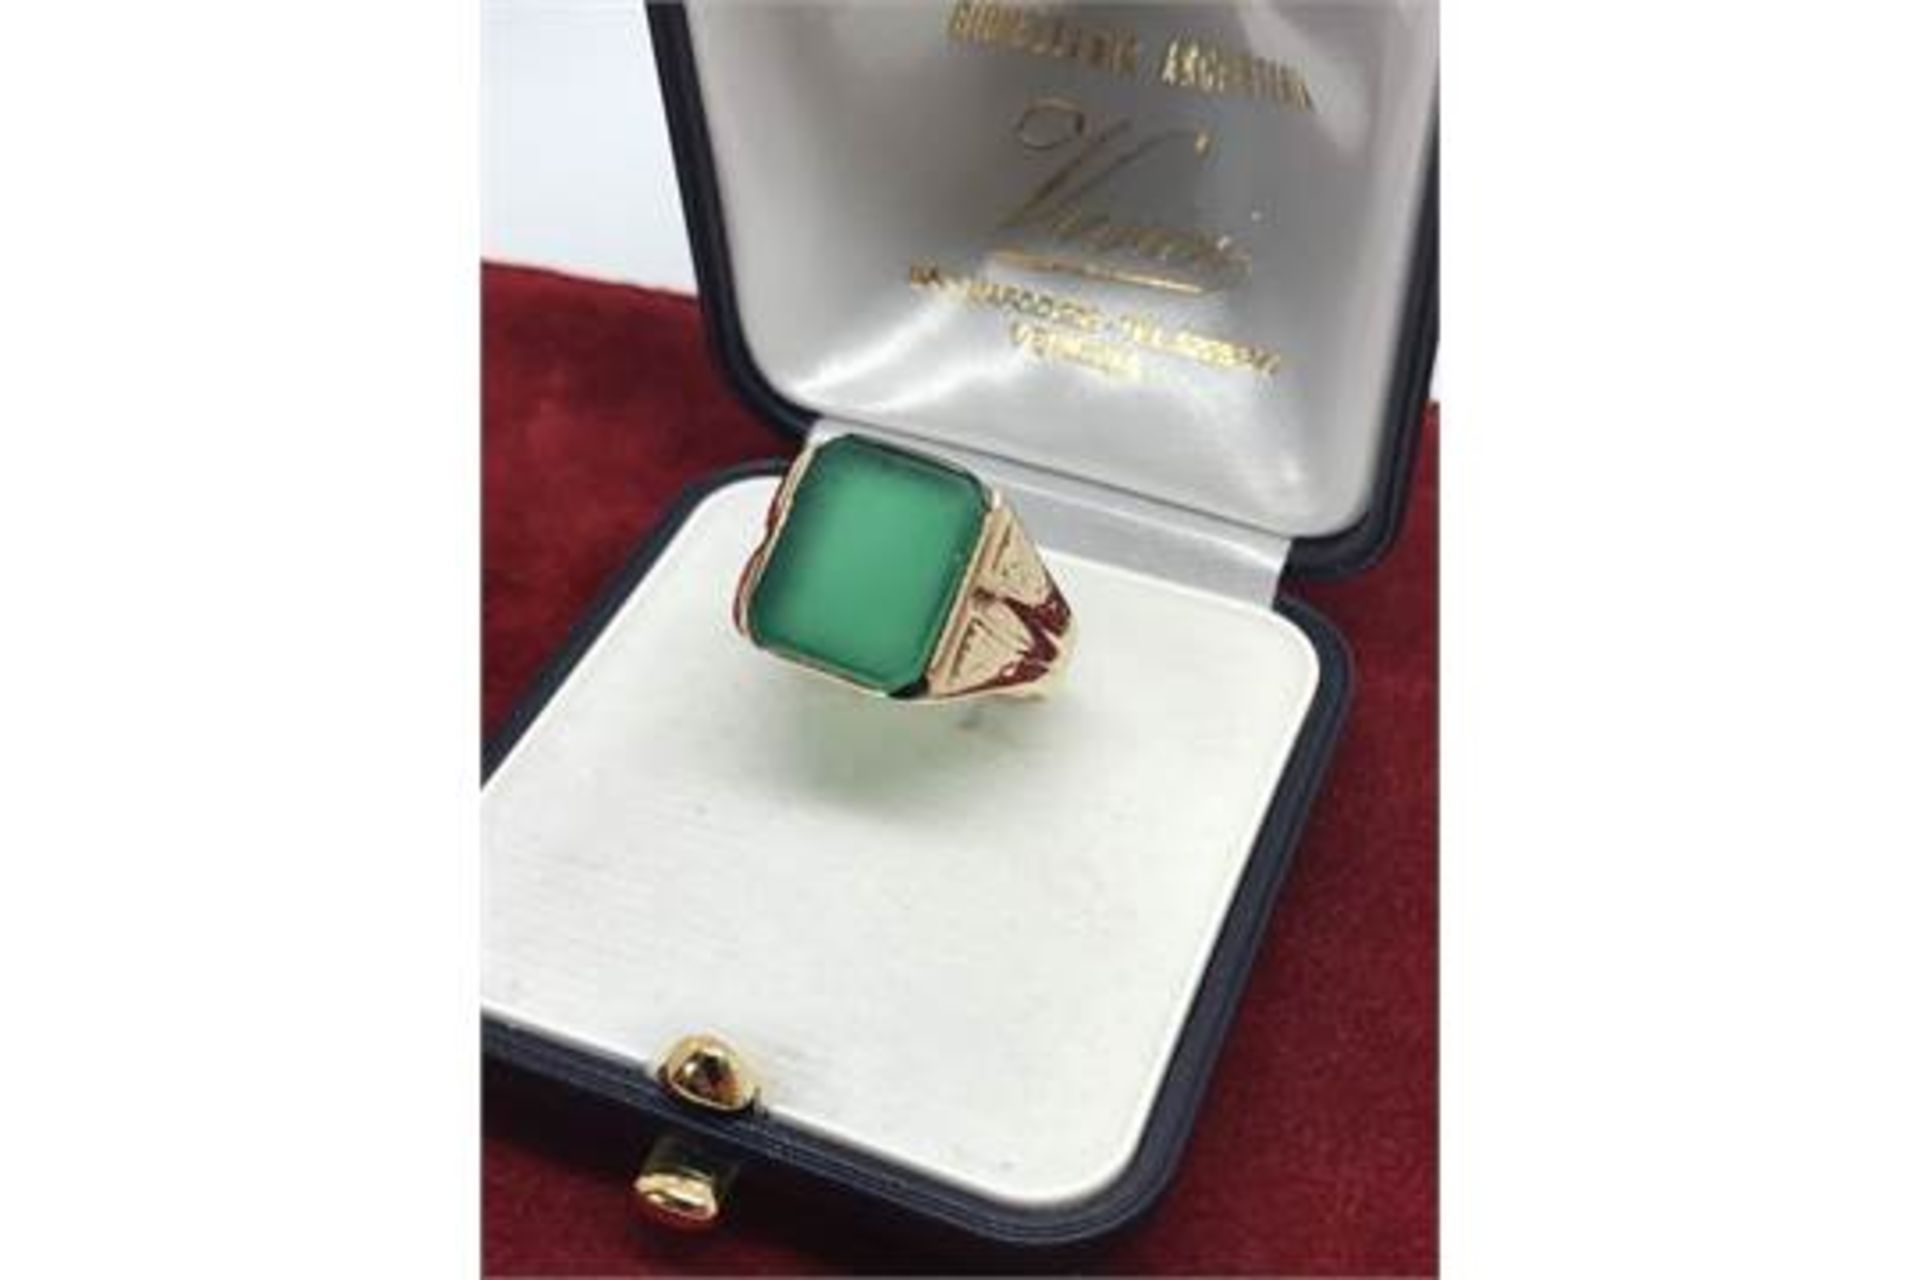 GENTS SIGNET RING SET WITH GREEN STONE IN 9ct GOLD - Image 2 of 2